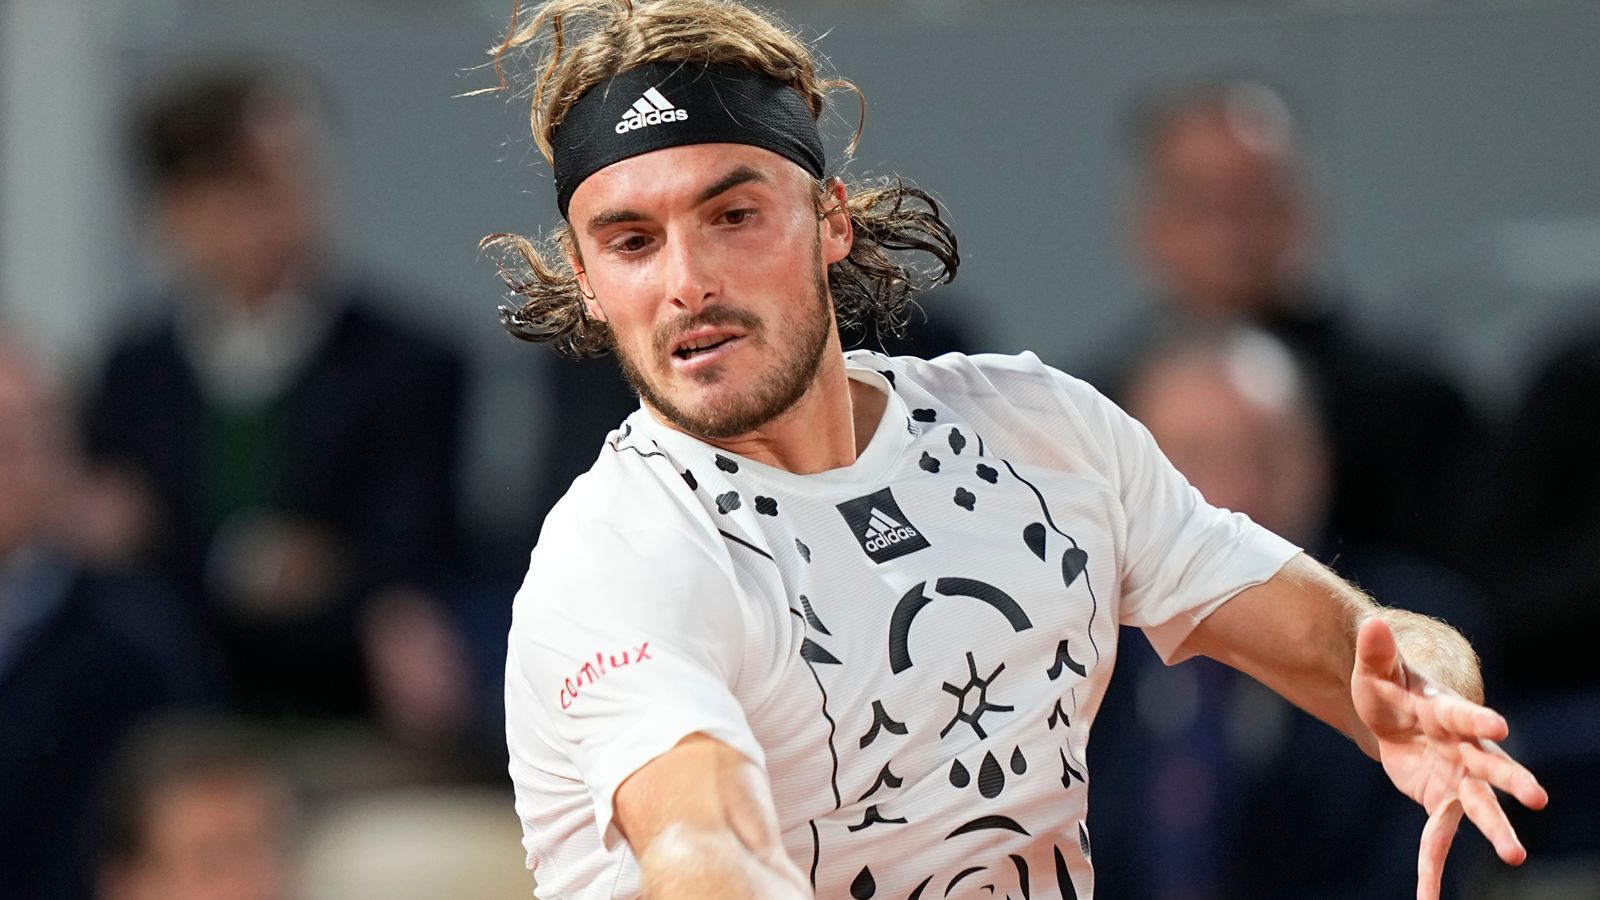 French Open: Stefanos Tsitsipas recovers from two sets down to beat Lorenzo Musetti